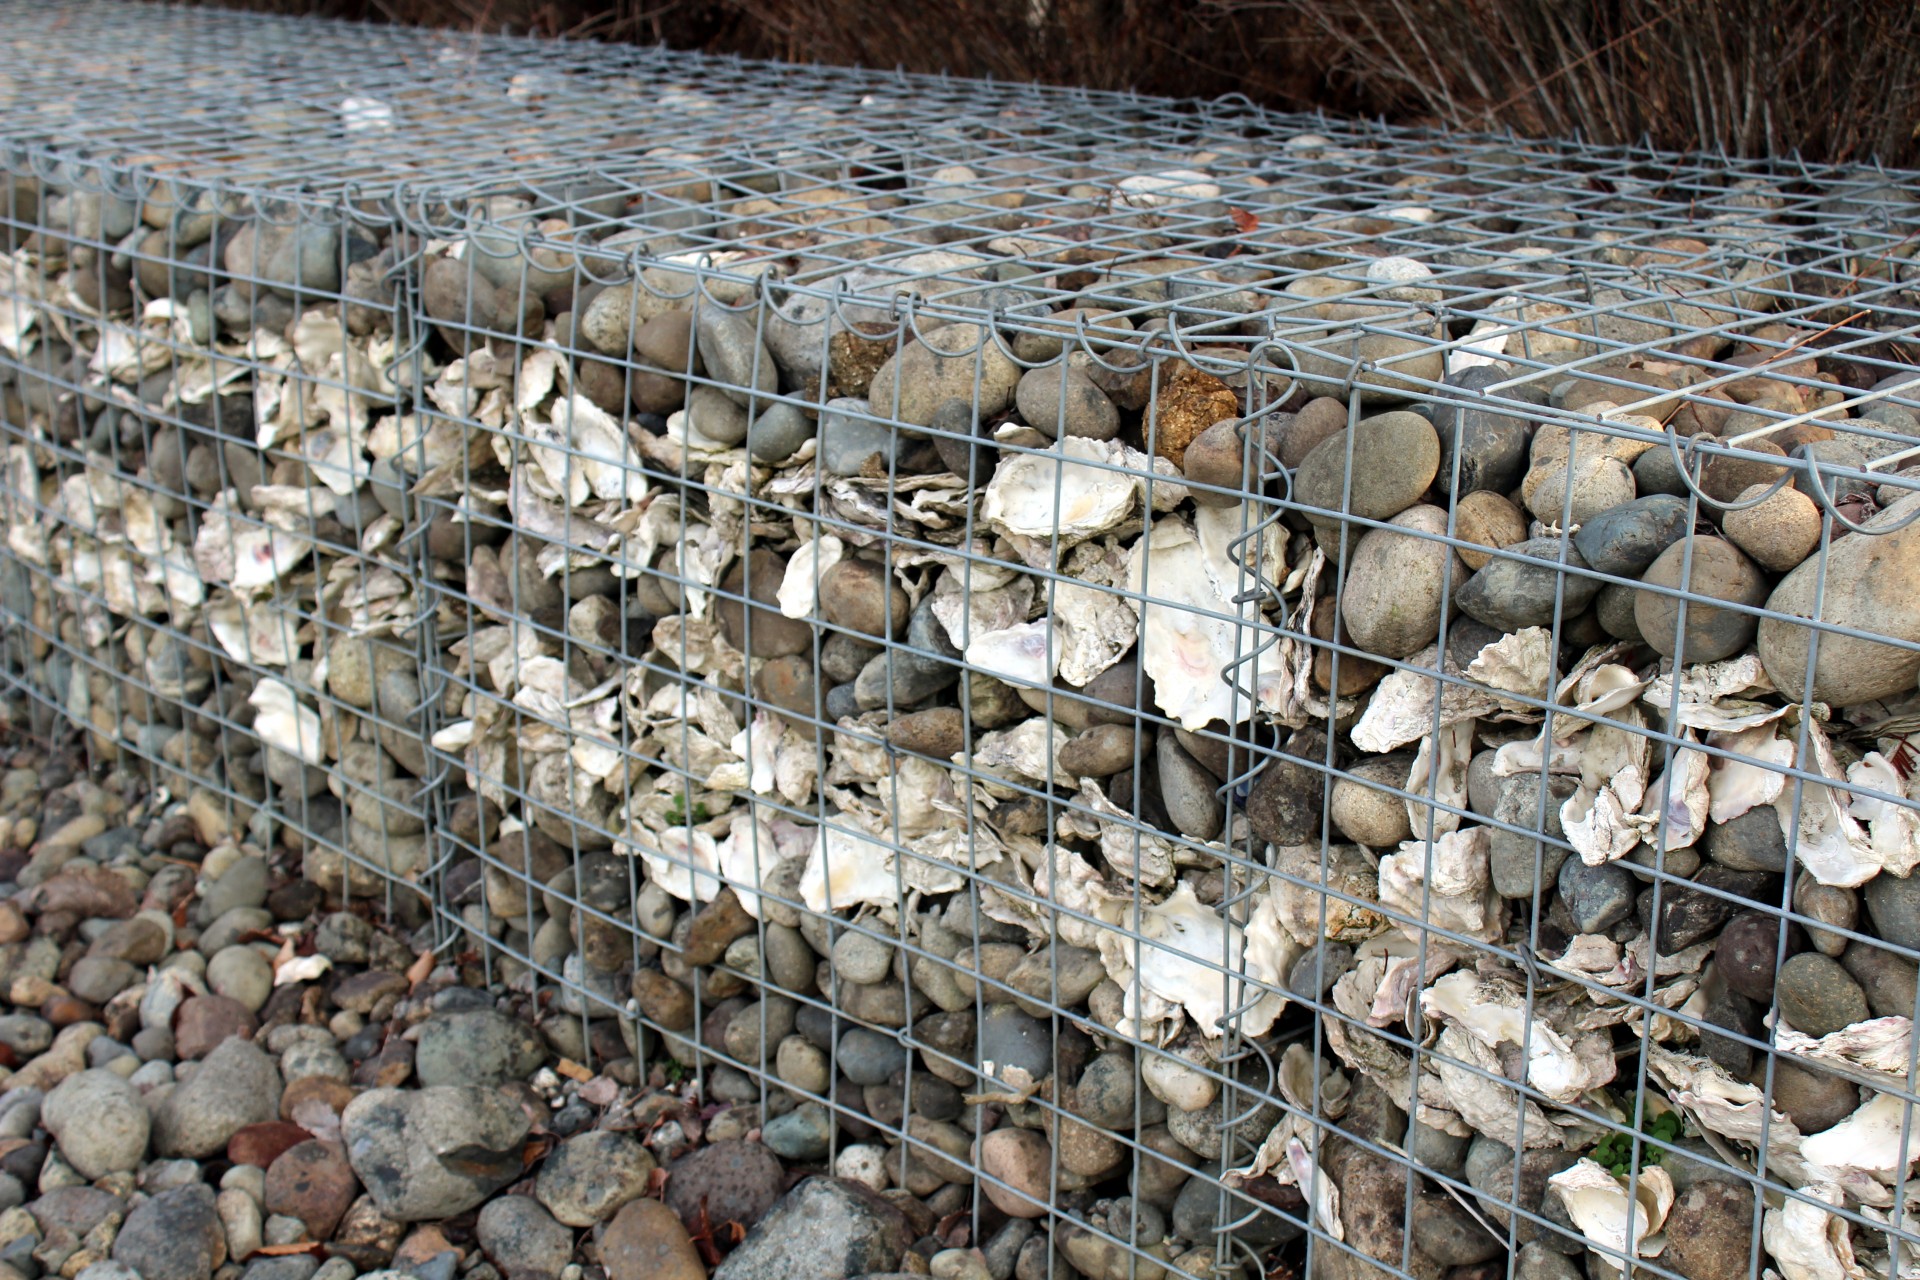 Stacked Gabion cubes containing rocks and oyster shells in a metal cage.